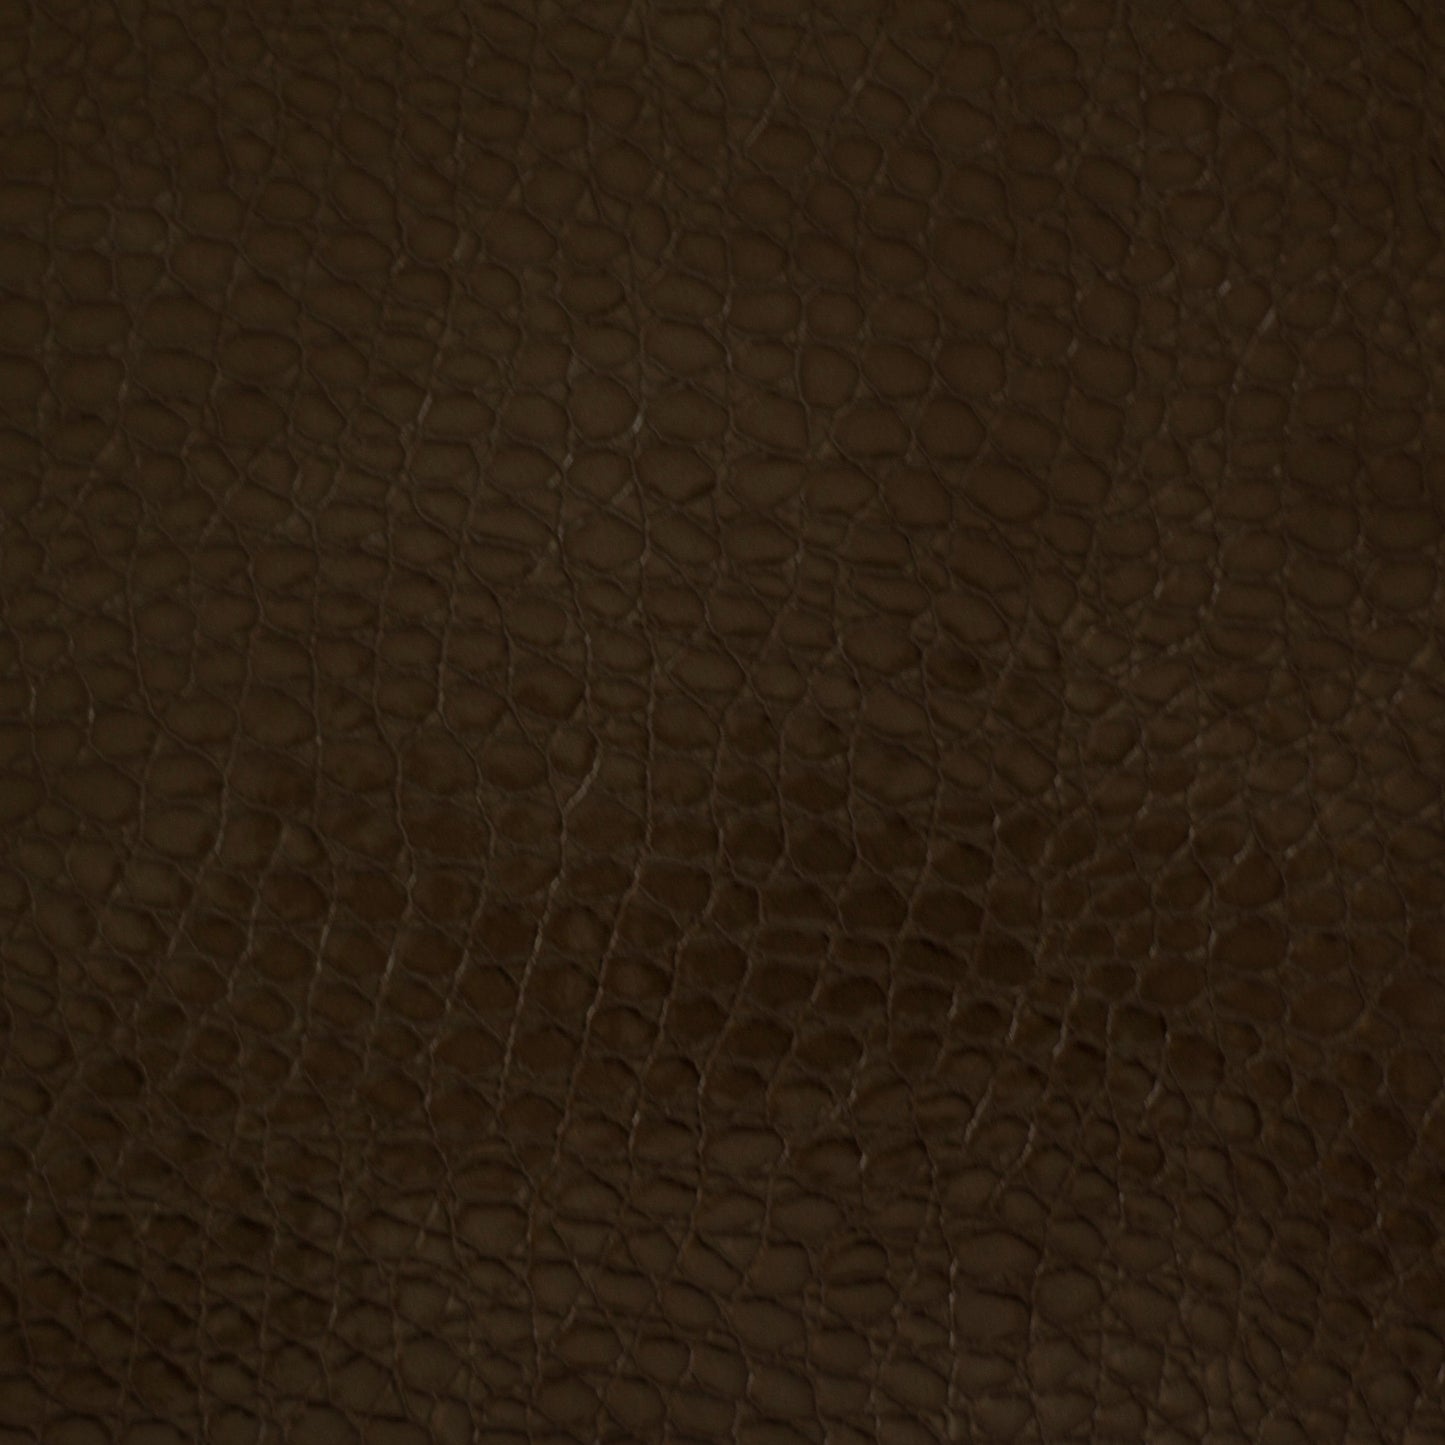 Cobble, Axin, Spilltop® Water Resistance, Hospitality Leather Hide